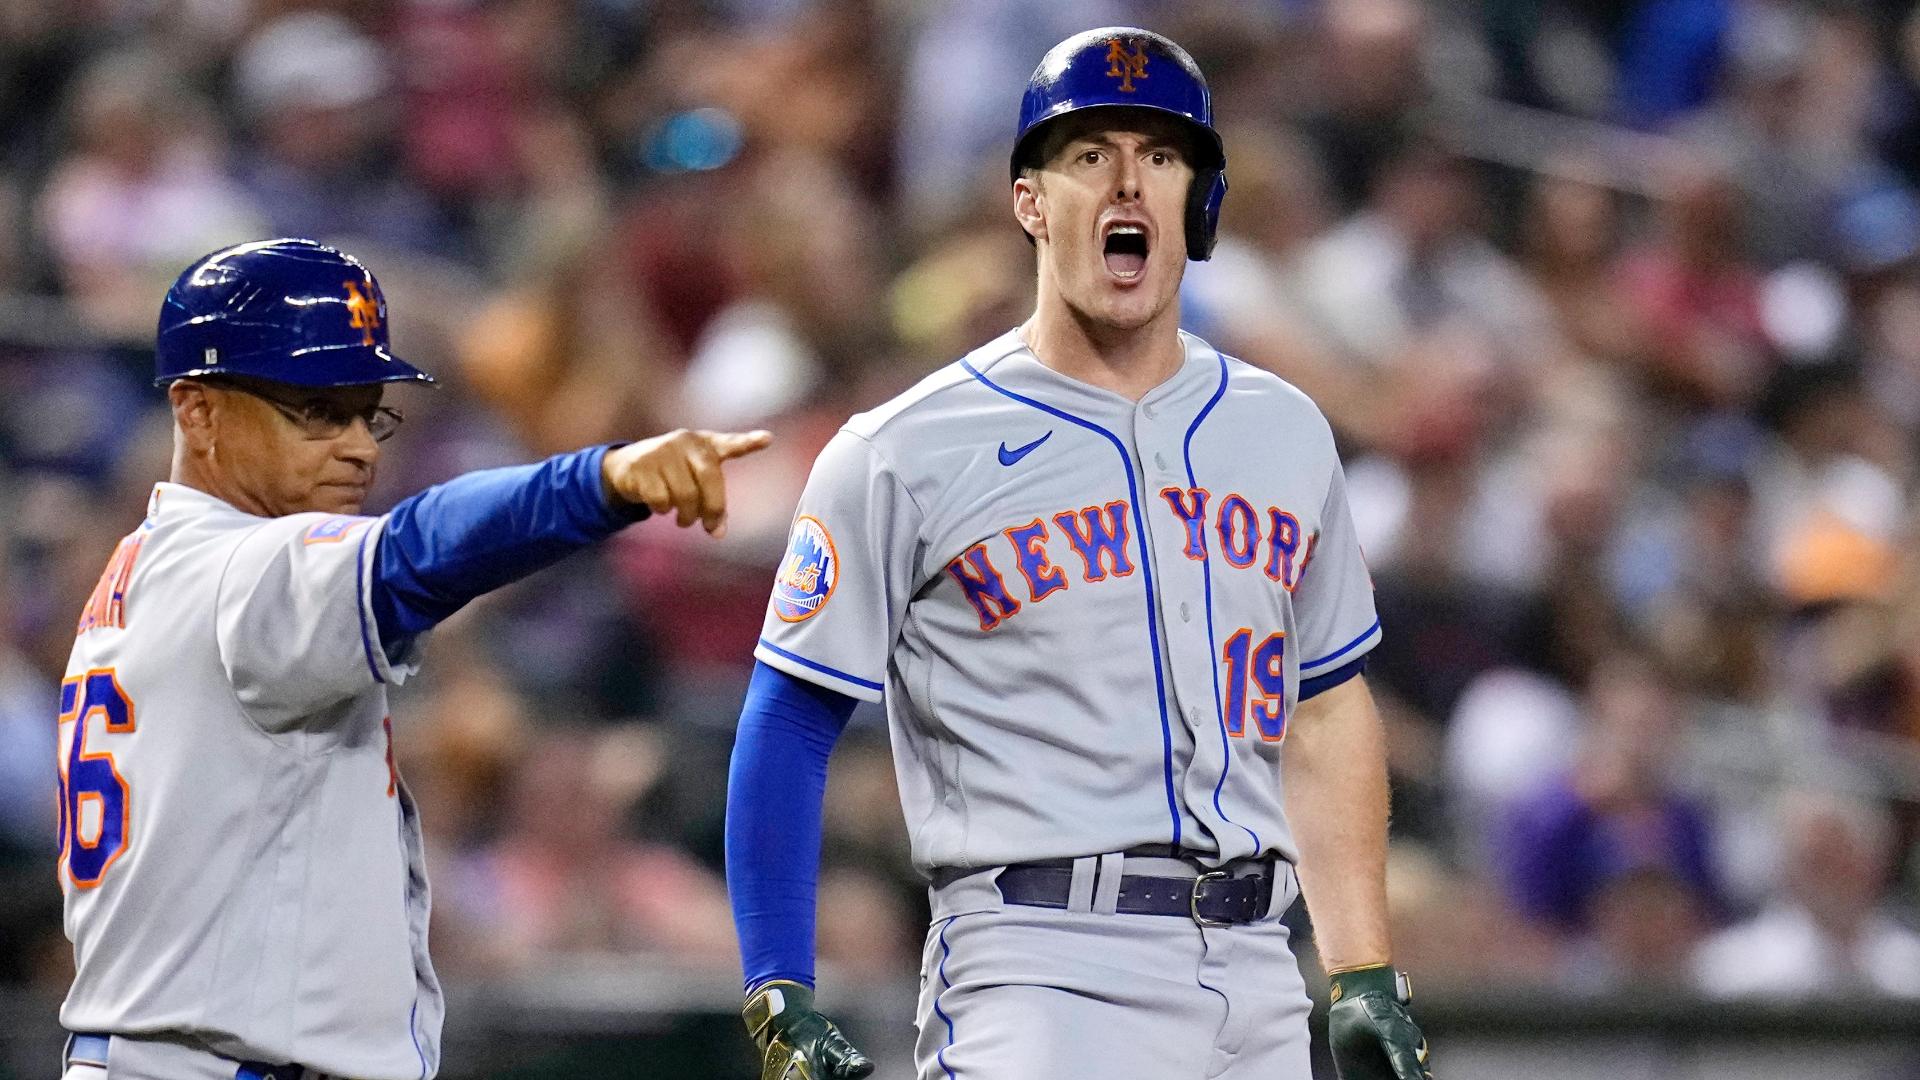 Down to last strike, the Mets rally on Alvarez's homer and Canha's ...